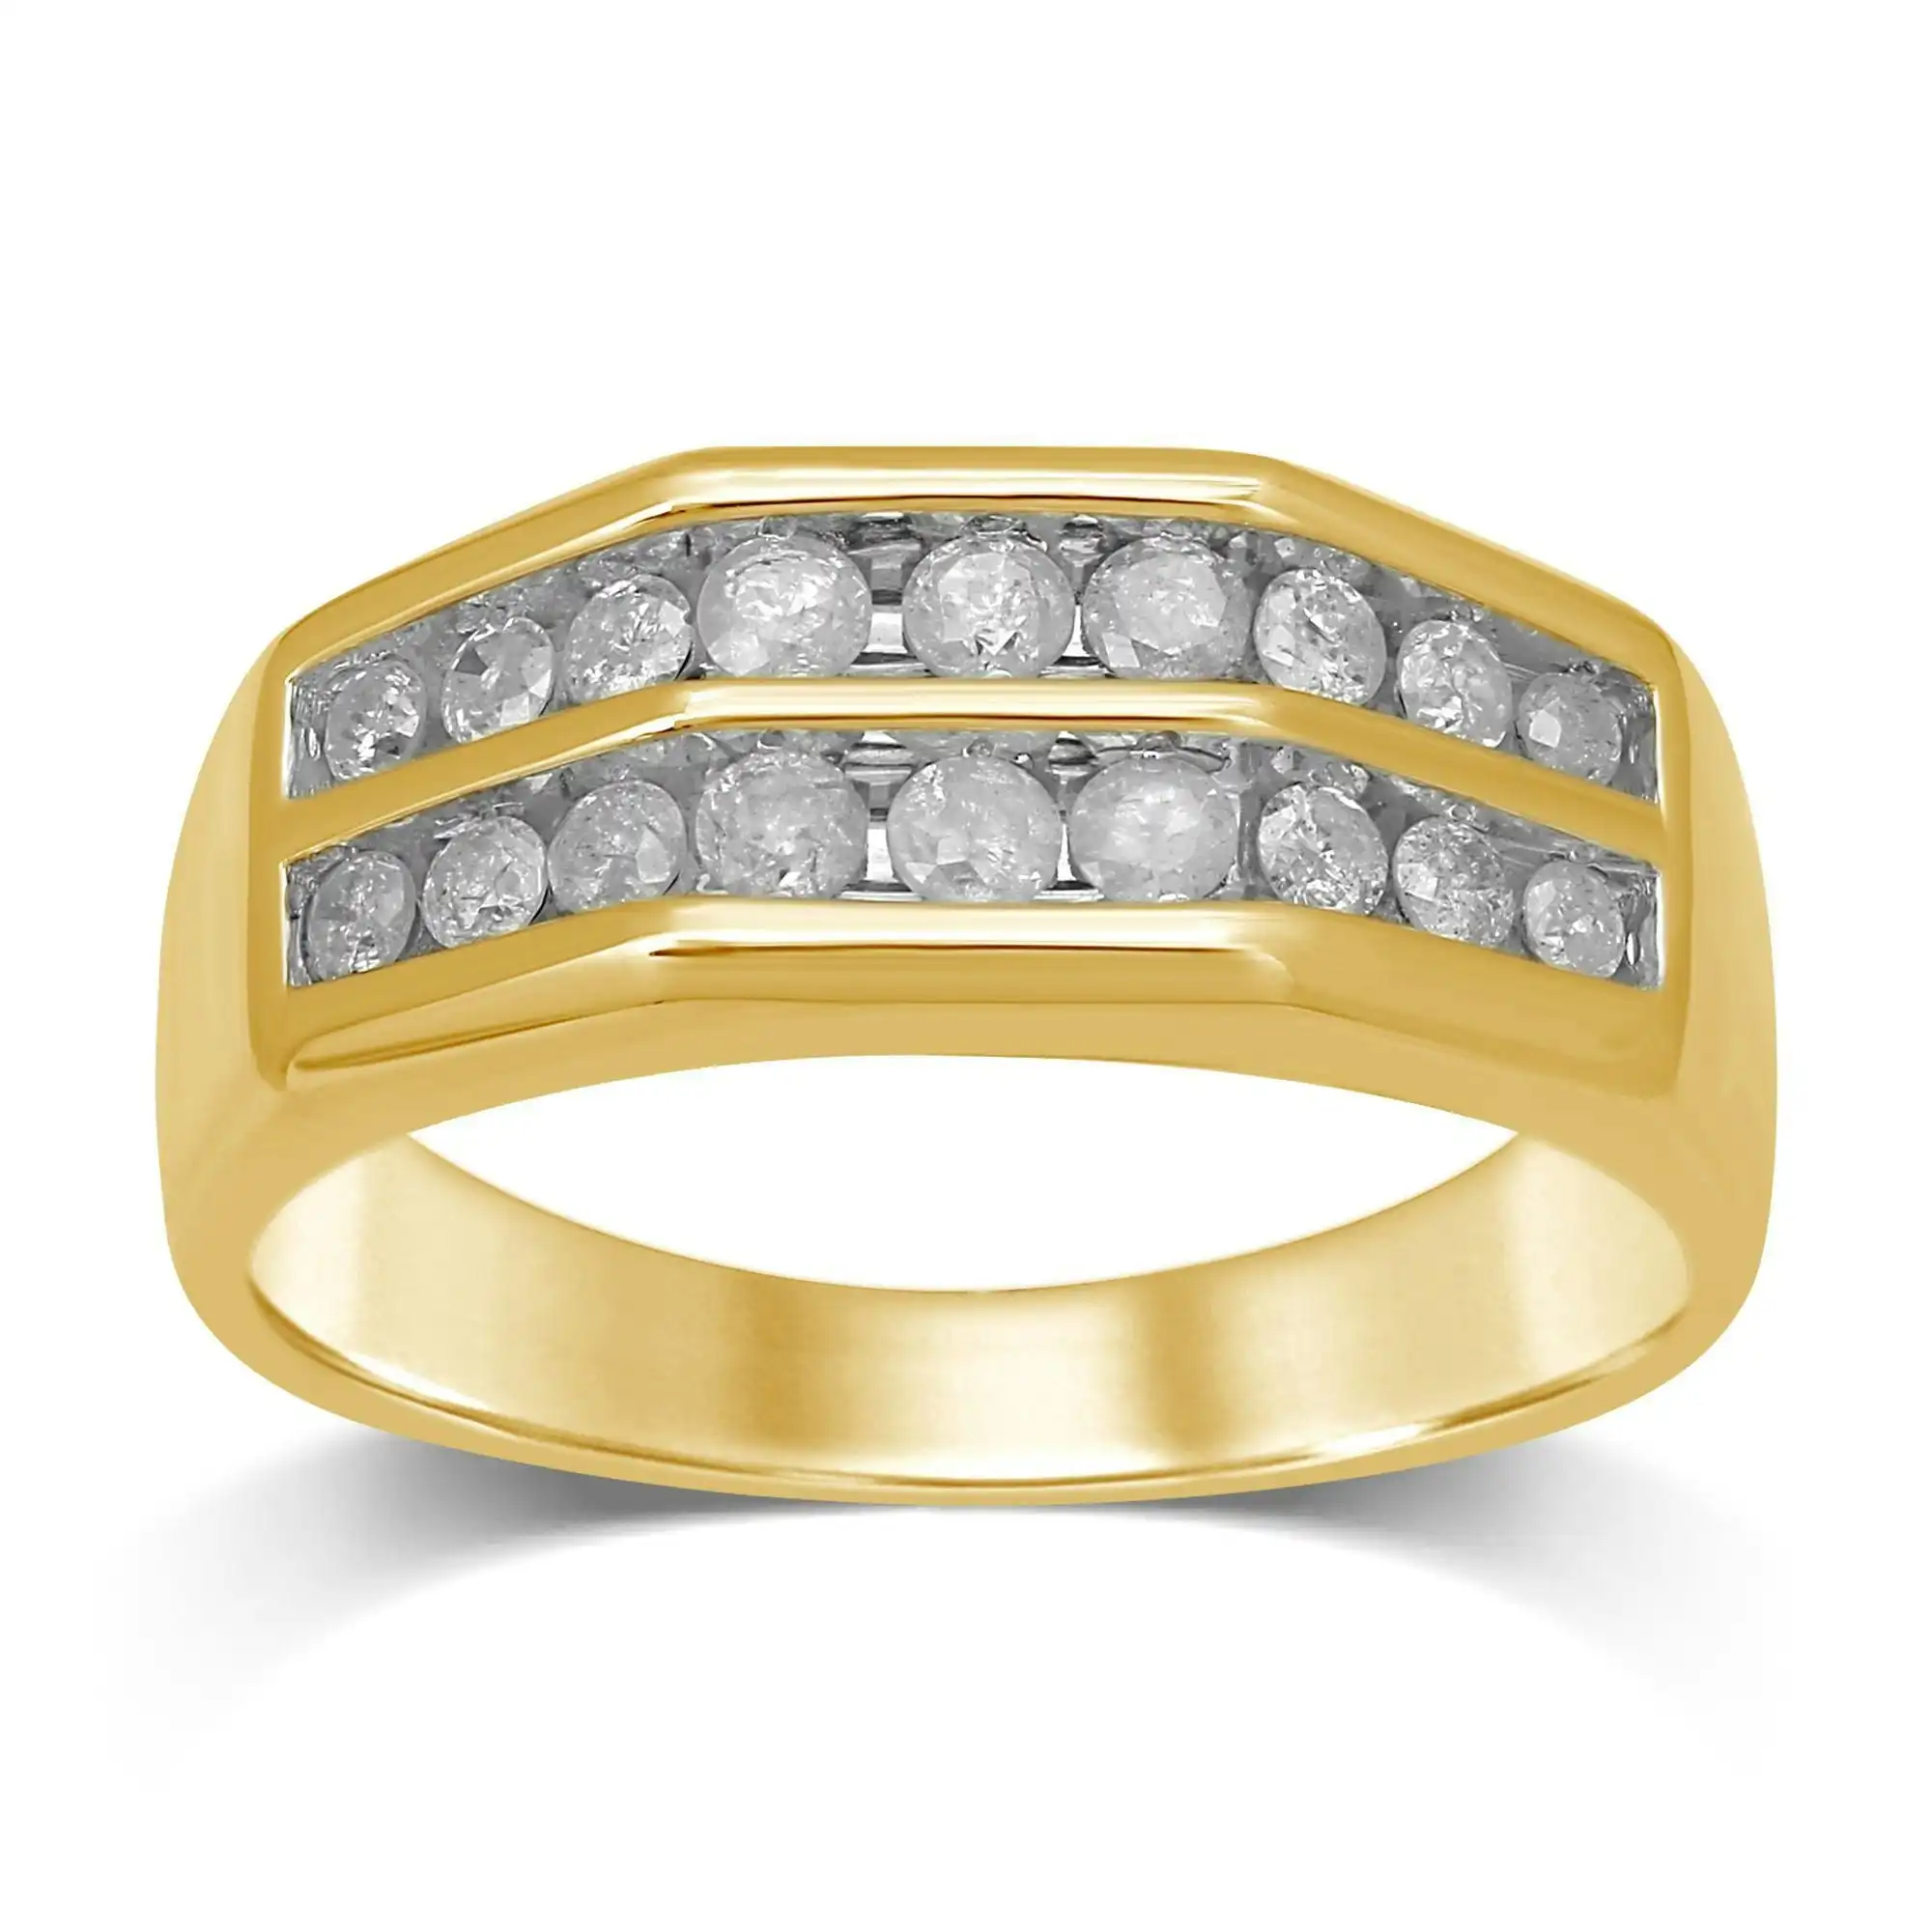 Men's Ring with 0.75ct of Diamonds in 9ct Yellow Gold